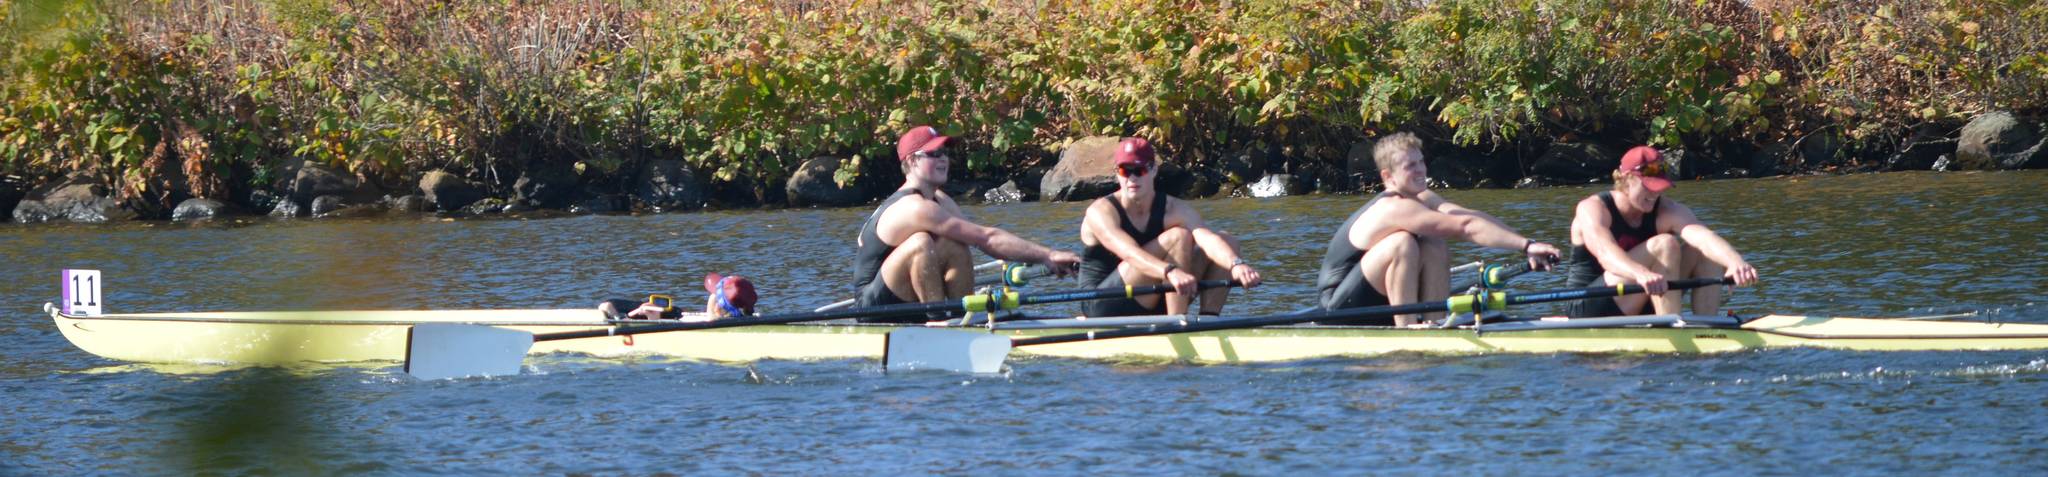 Stanford University’s varsity four boat finished eighth at the Head of the Charles regatta in Boston last October. Left to right in the boat, coxswain Sarah Taylor, John Spencer, Will Spencer, John Coffey and Bart Scherpcier. Photo courtesy of Steve Buckley